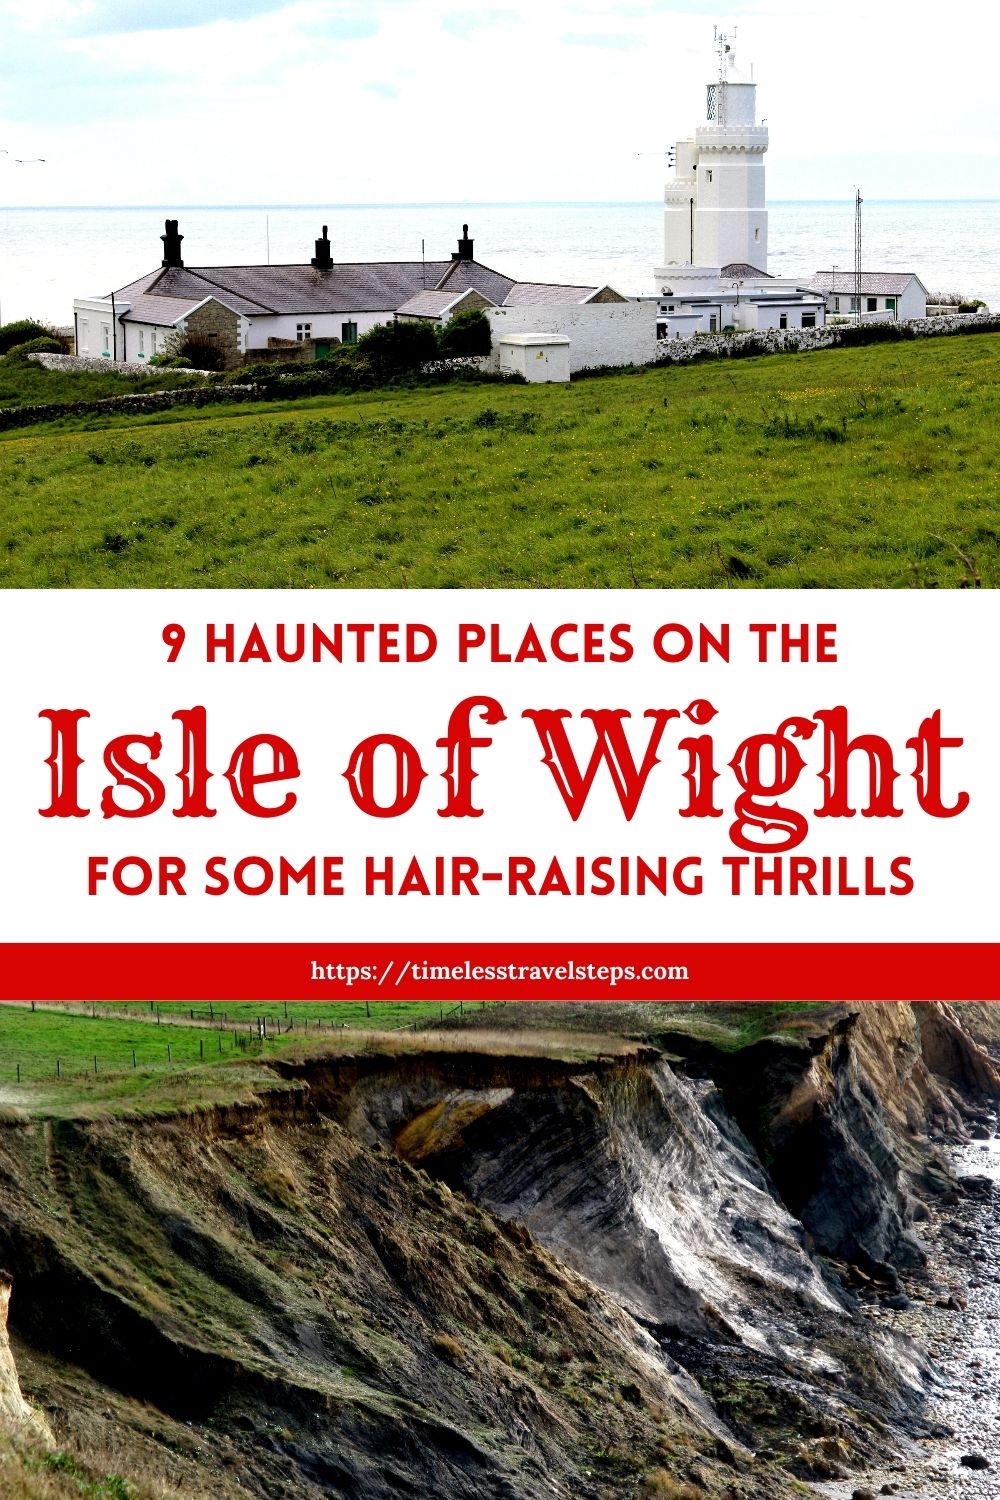 spooky and haunted places on the Isle of Wight | timelesstravelsteps